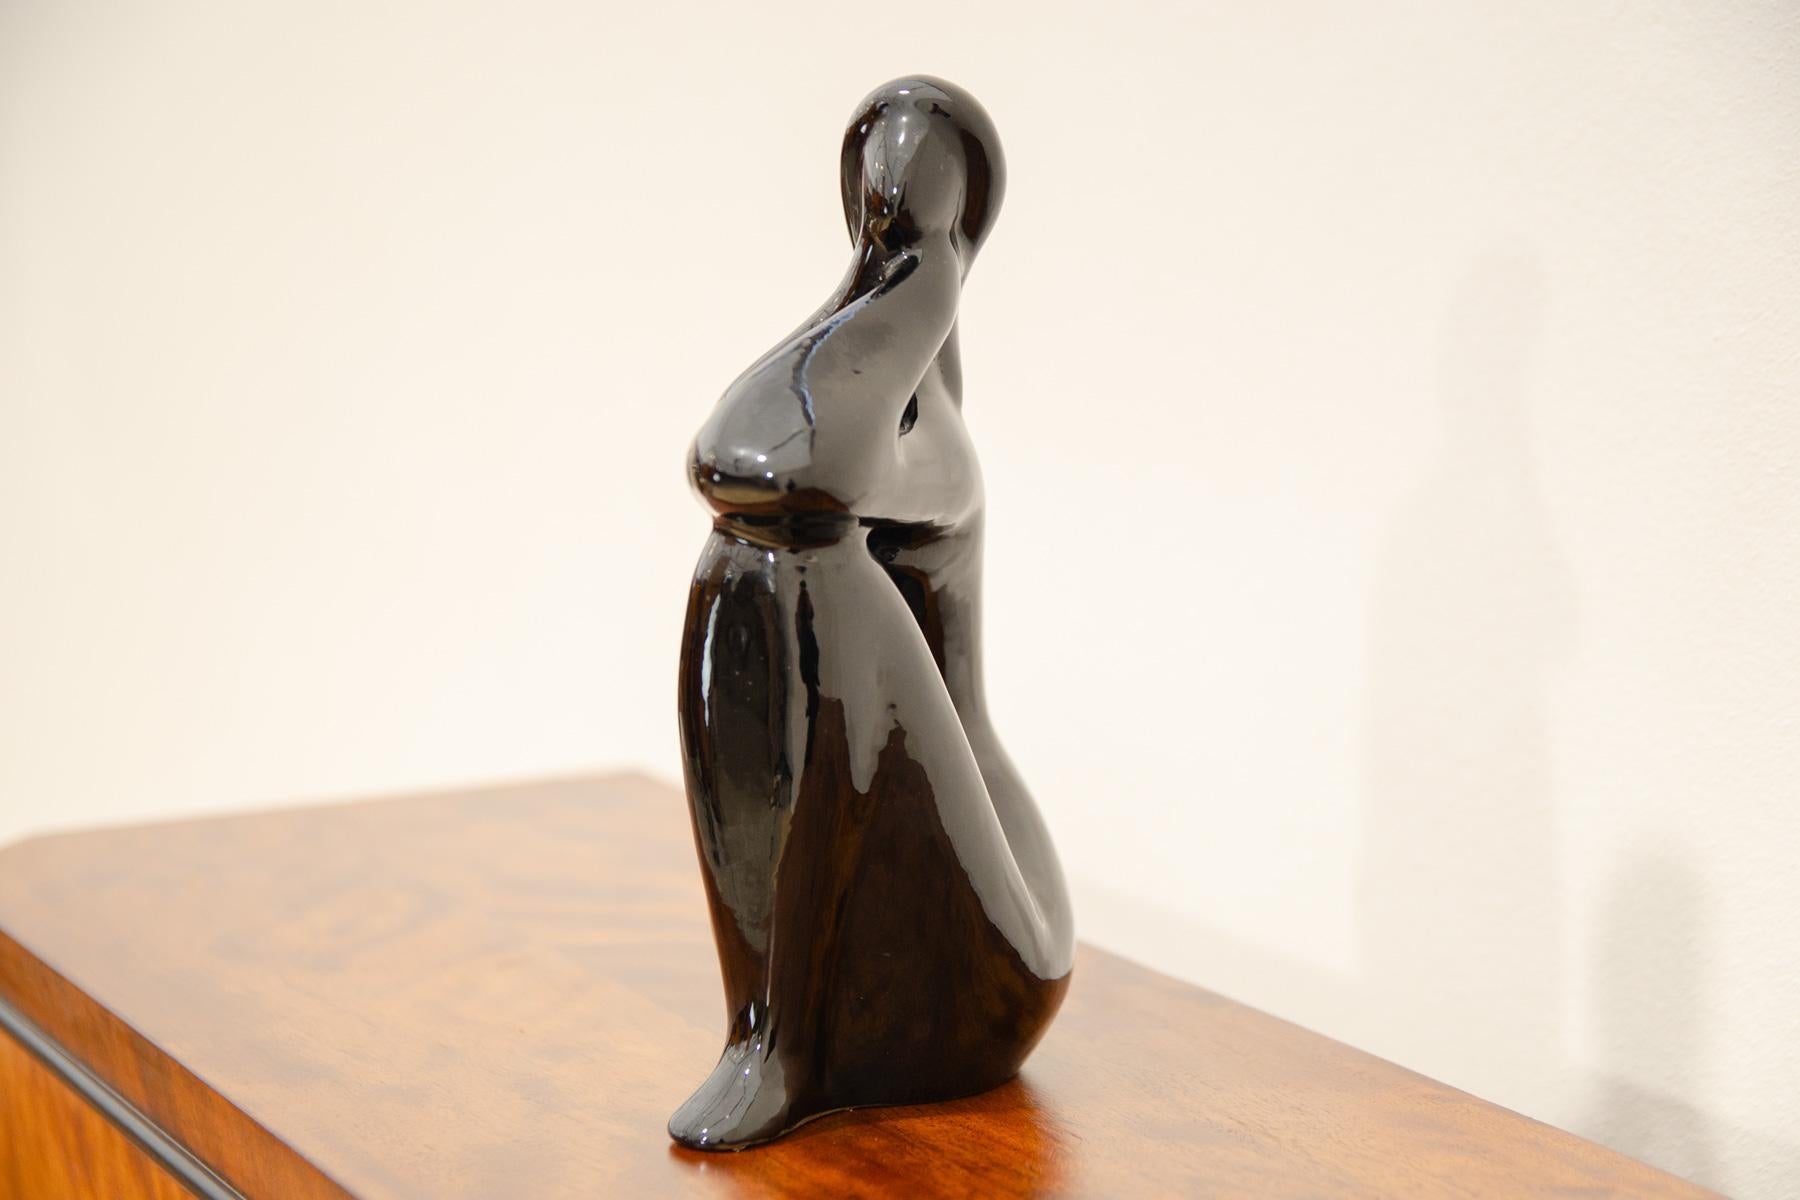 Ceramic sculpture of naked girl designed by Czechoslovak artist Jitka Forejtová. Made in 1960s. The sculpture is made of ceramics with black glaze.
This minimalist design of the statuette fully corresponds to the so-called Brussels period in